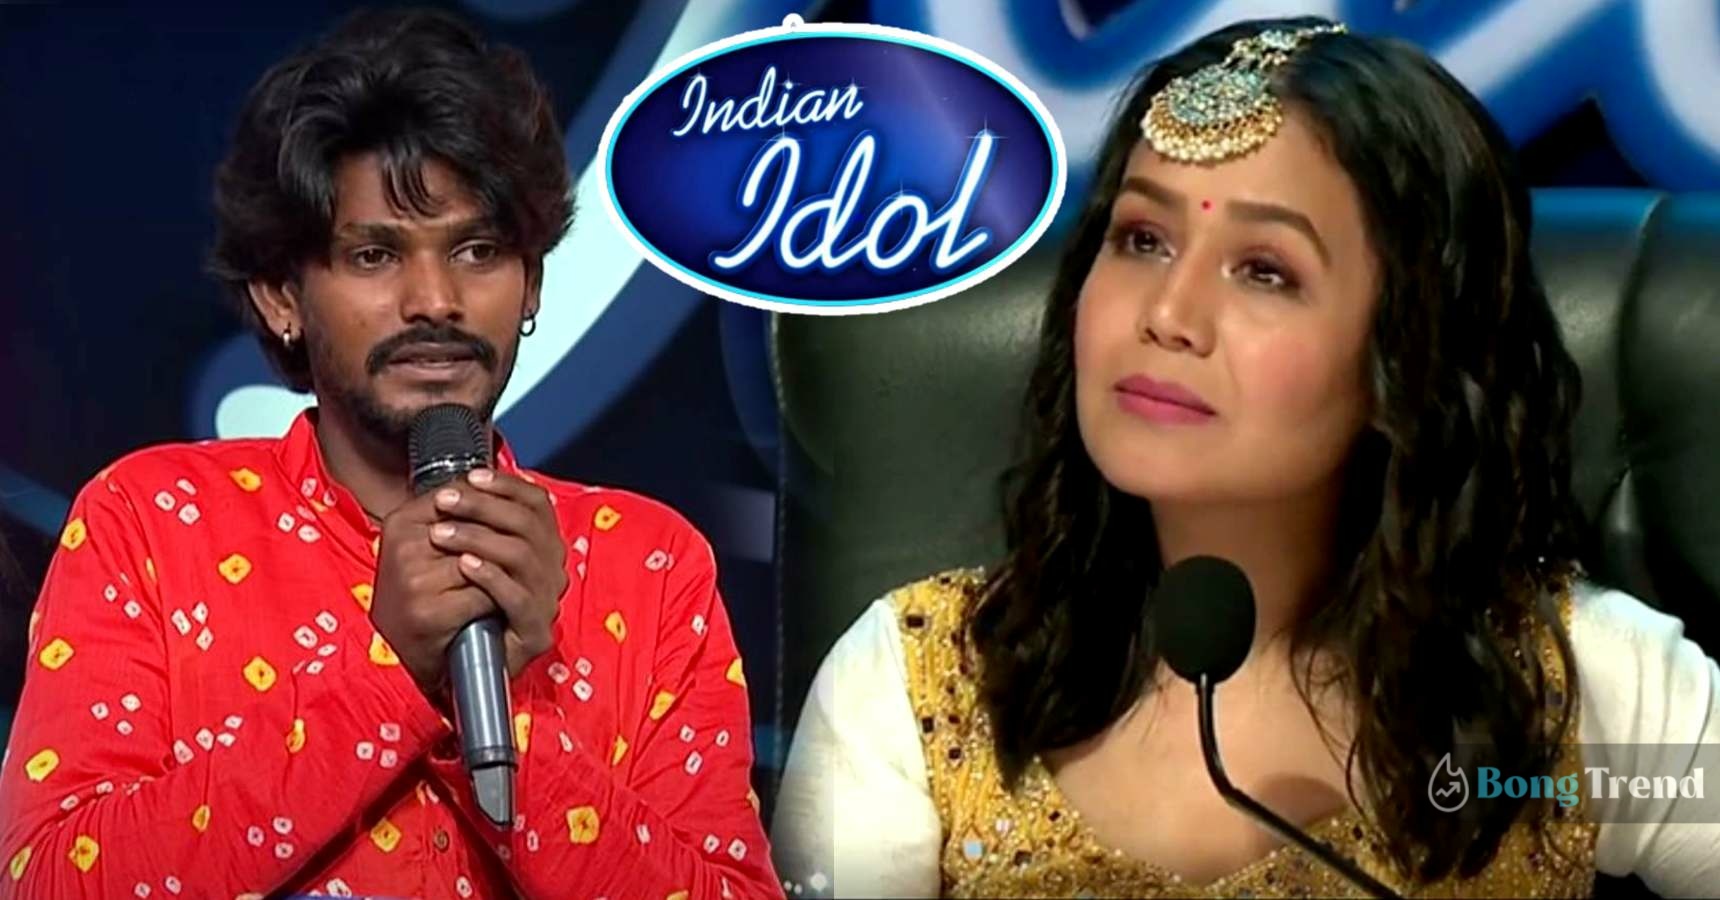 Indian Idol Fame Sawai Bhatt still struglling with poverty even after getting famous